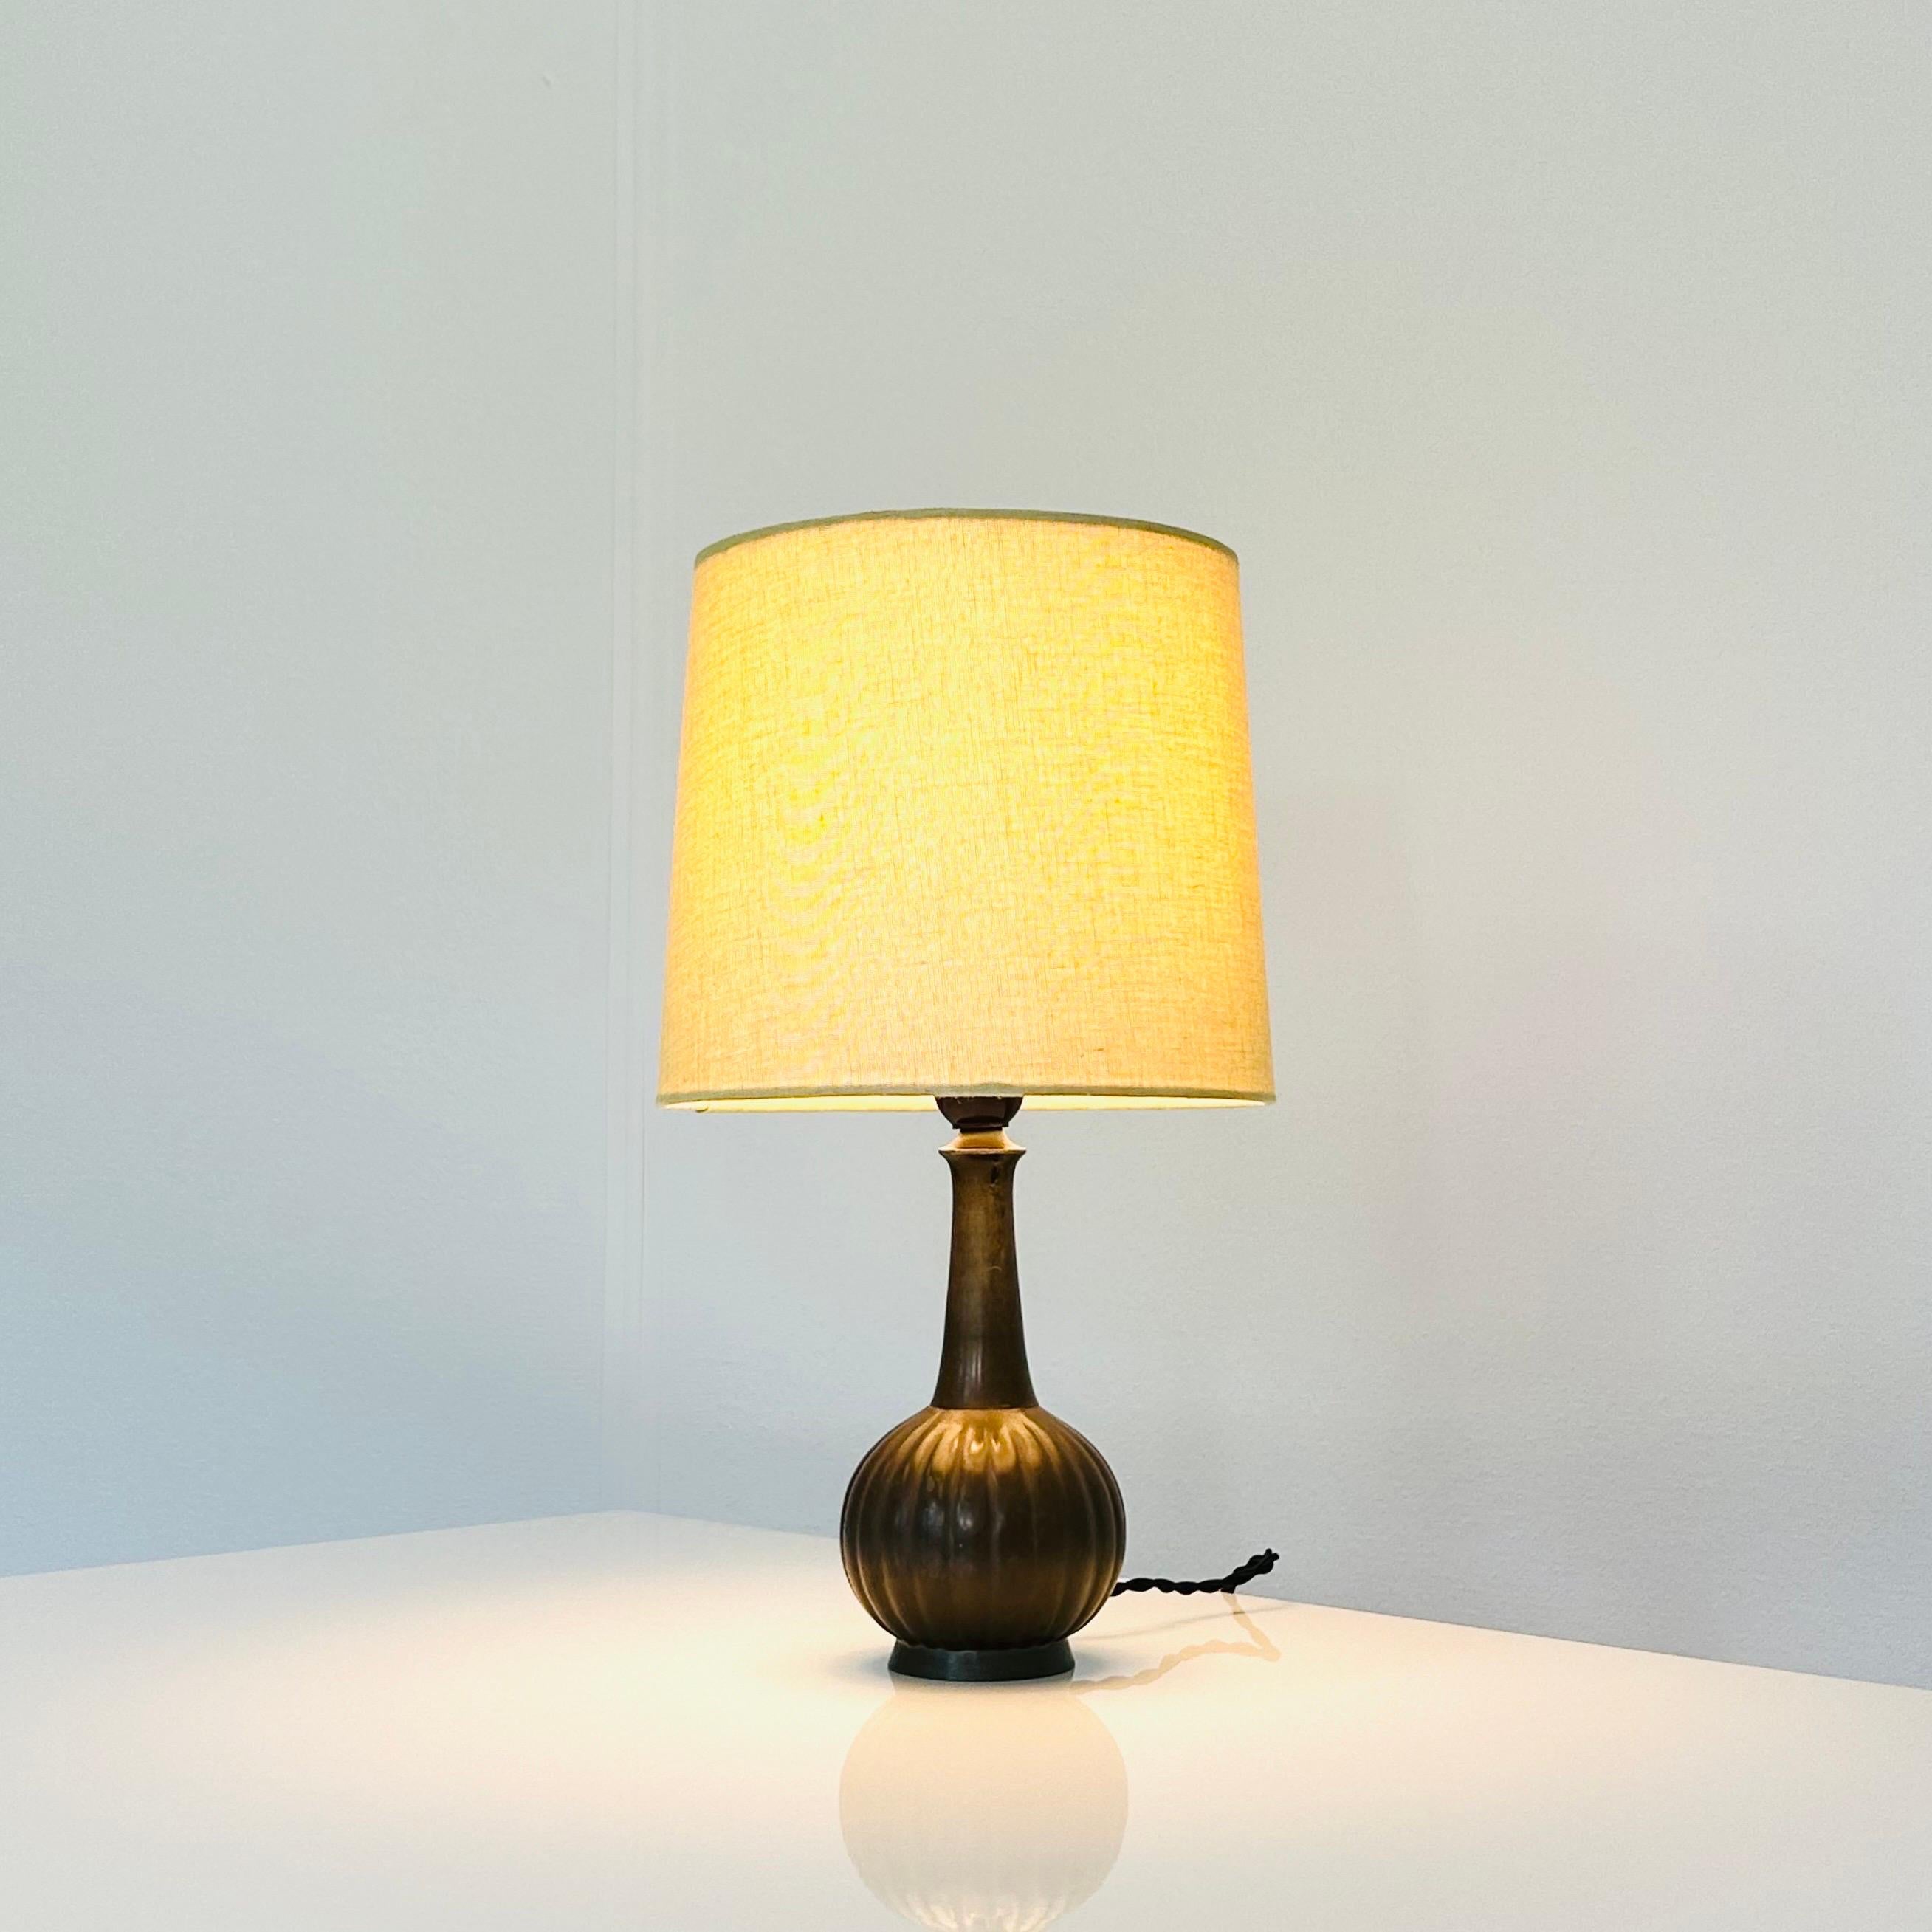 An early, exquisite Just Andersen table lamp. A rare find for collectors and design enthusiasts.
* A metal lamp with a round base and vertical lines with a beige coloured fabric shade
* Designer: Just Andersen
* Model: D140 (stamped ‘Just